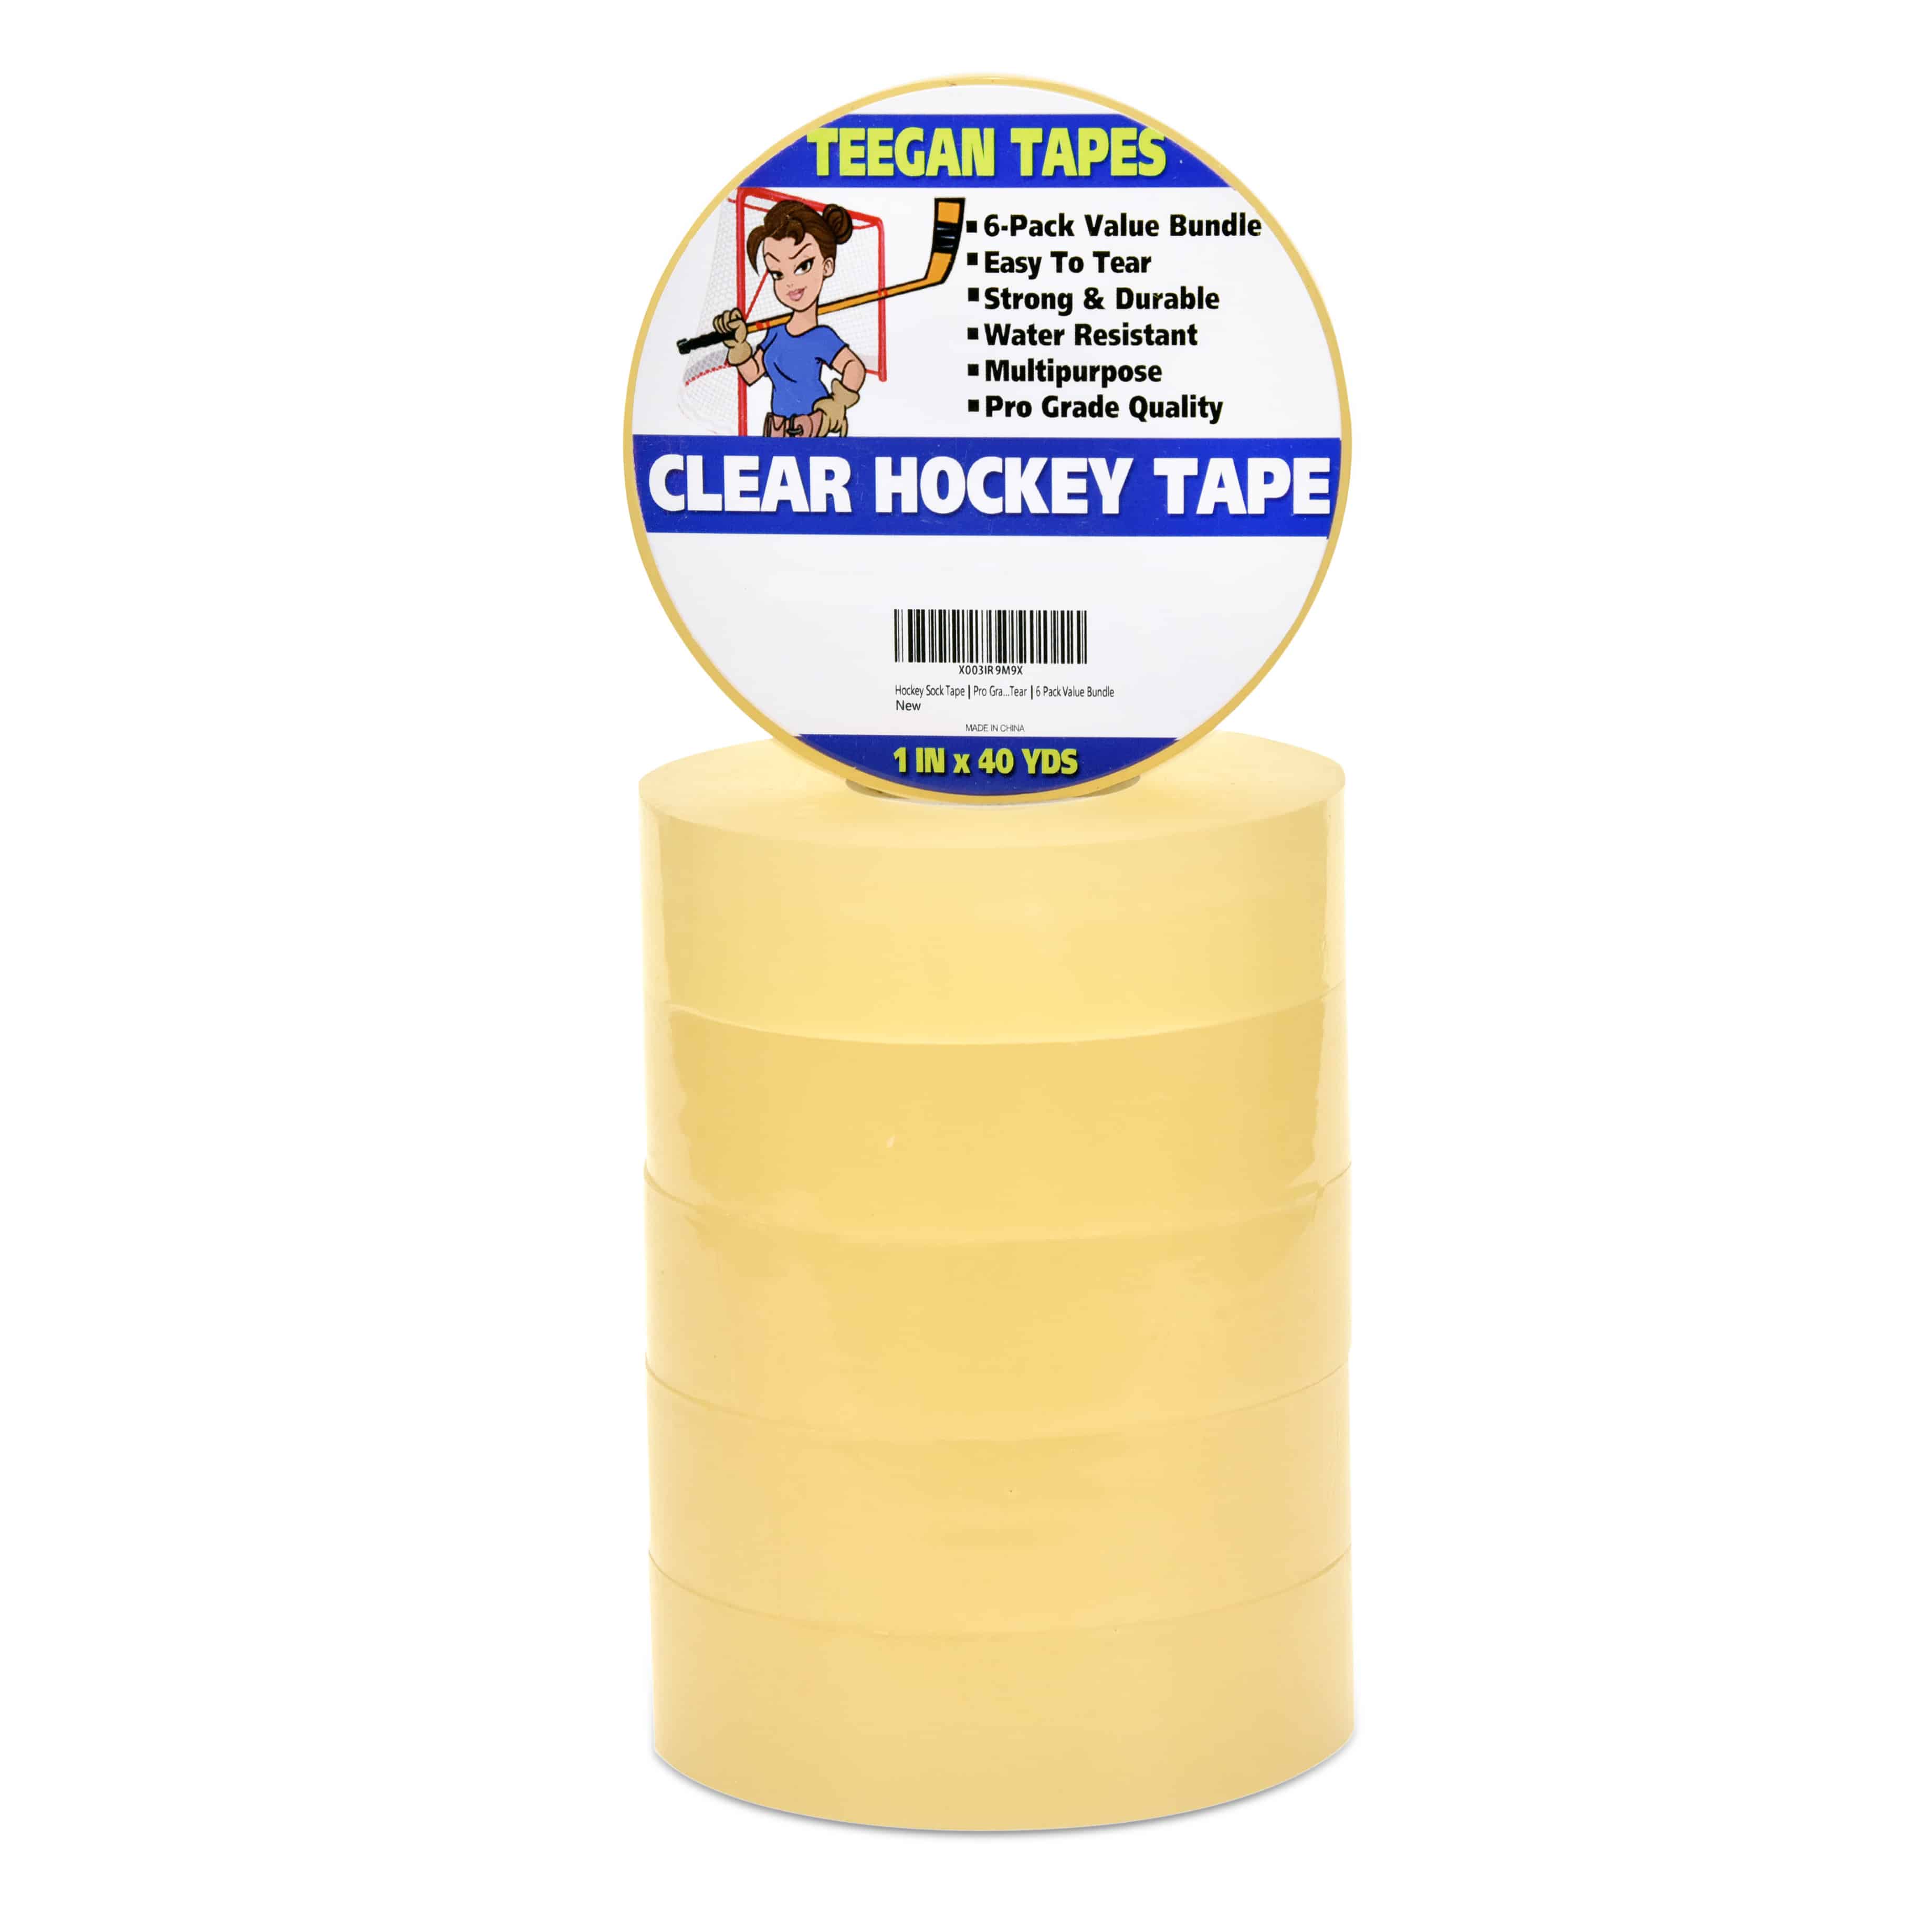 Clear Hockey Tape 4-Pack, Clear Strong Adhesive for Ice Hockey Shin Pads, Guards and Socks. Easy Tearing Pro Sports Tape Made in USA by CellyTape